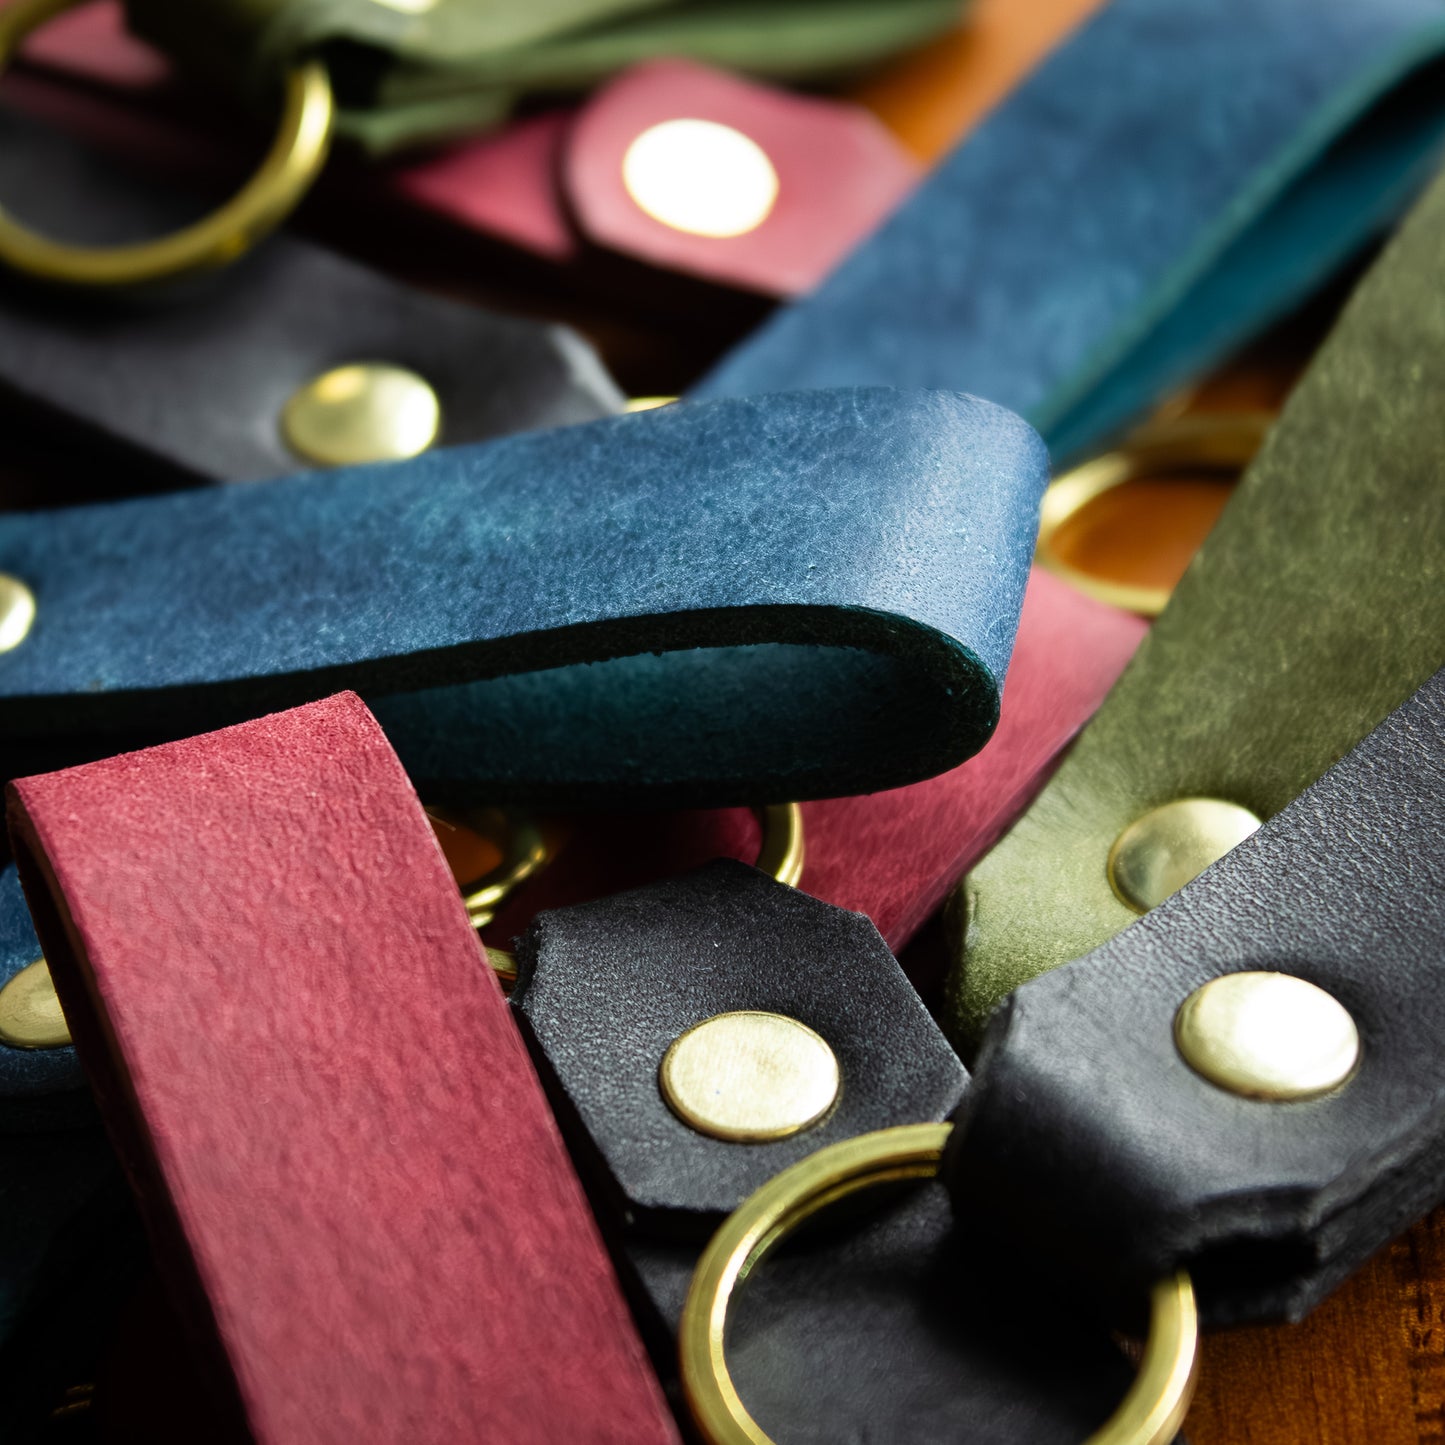 handmade leather keytags with solid brass keyring and rivet on top of wooden chopping board - Made from Peublo leather - blue, black, green, red 